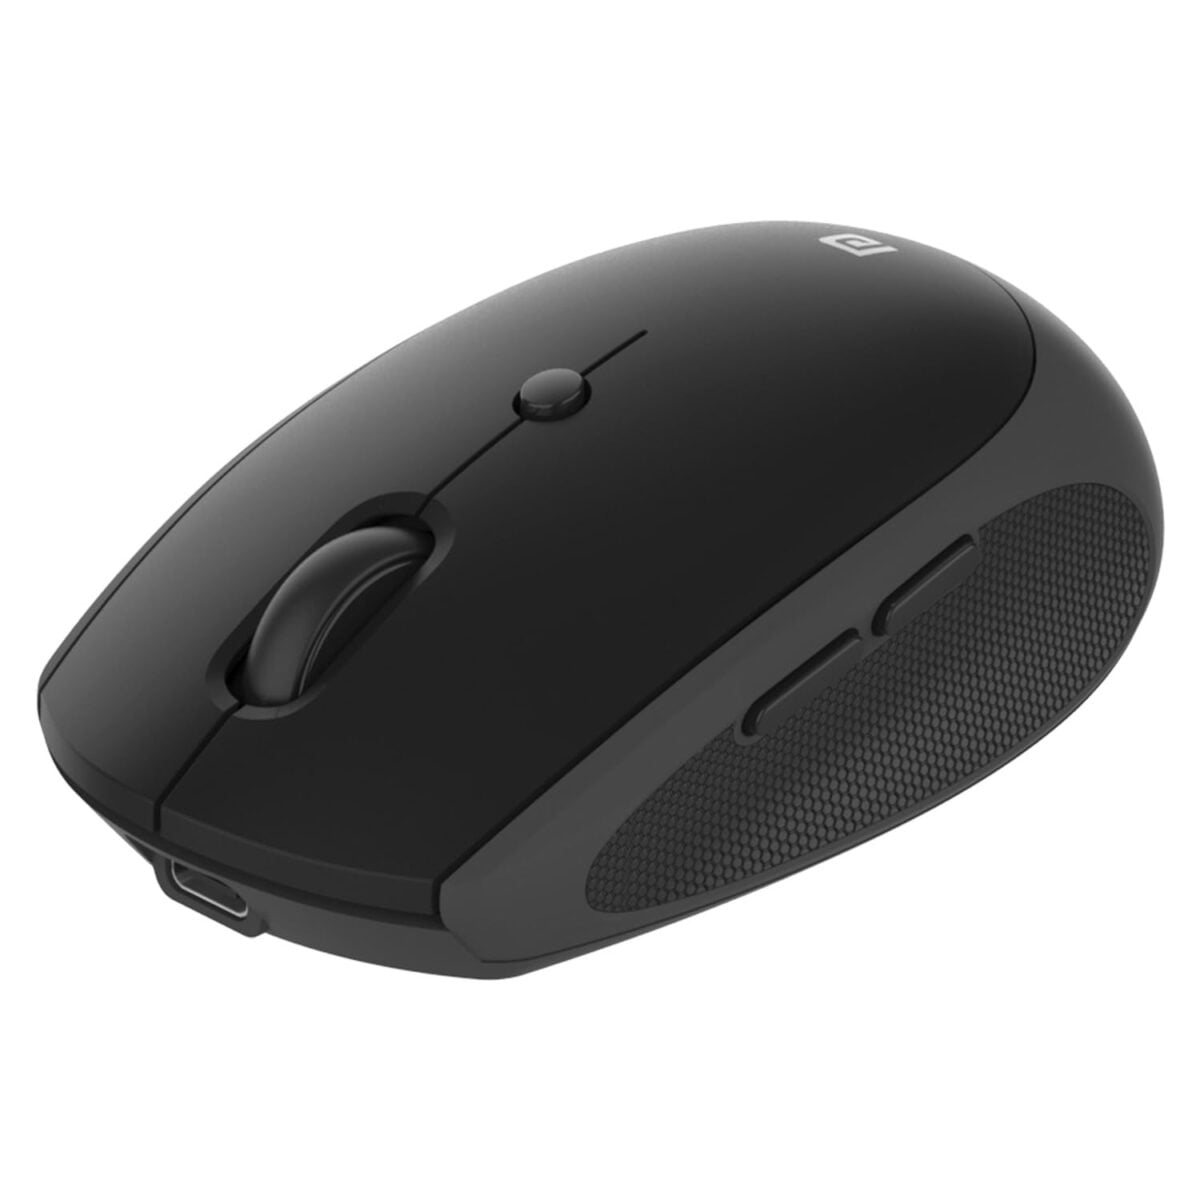 Portronics toad iii wireless mouse